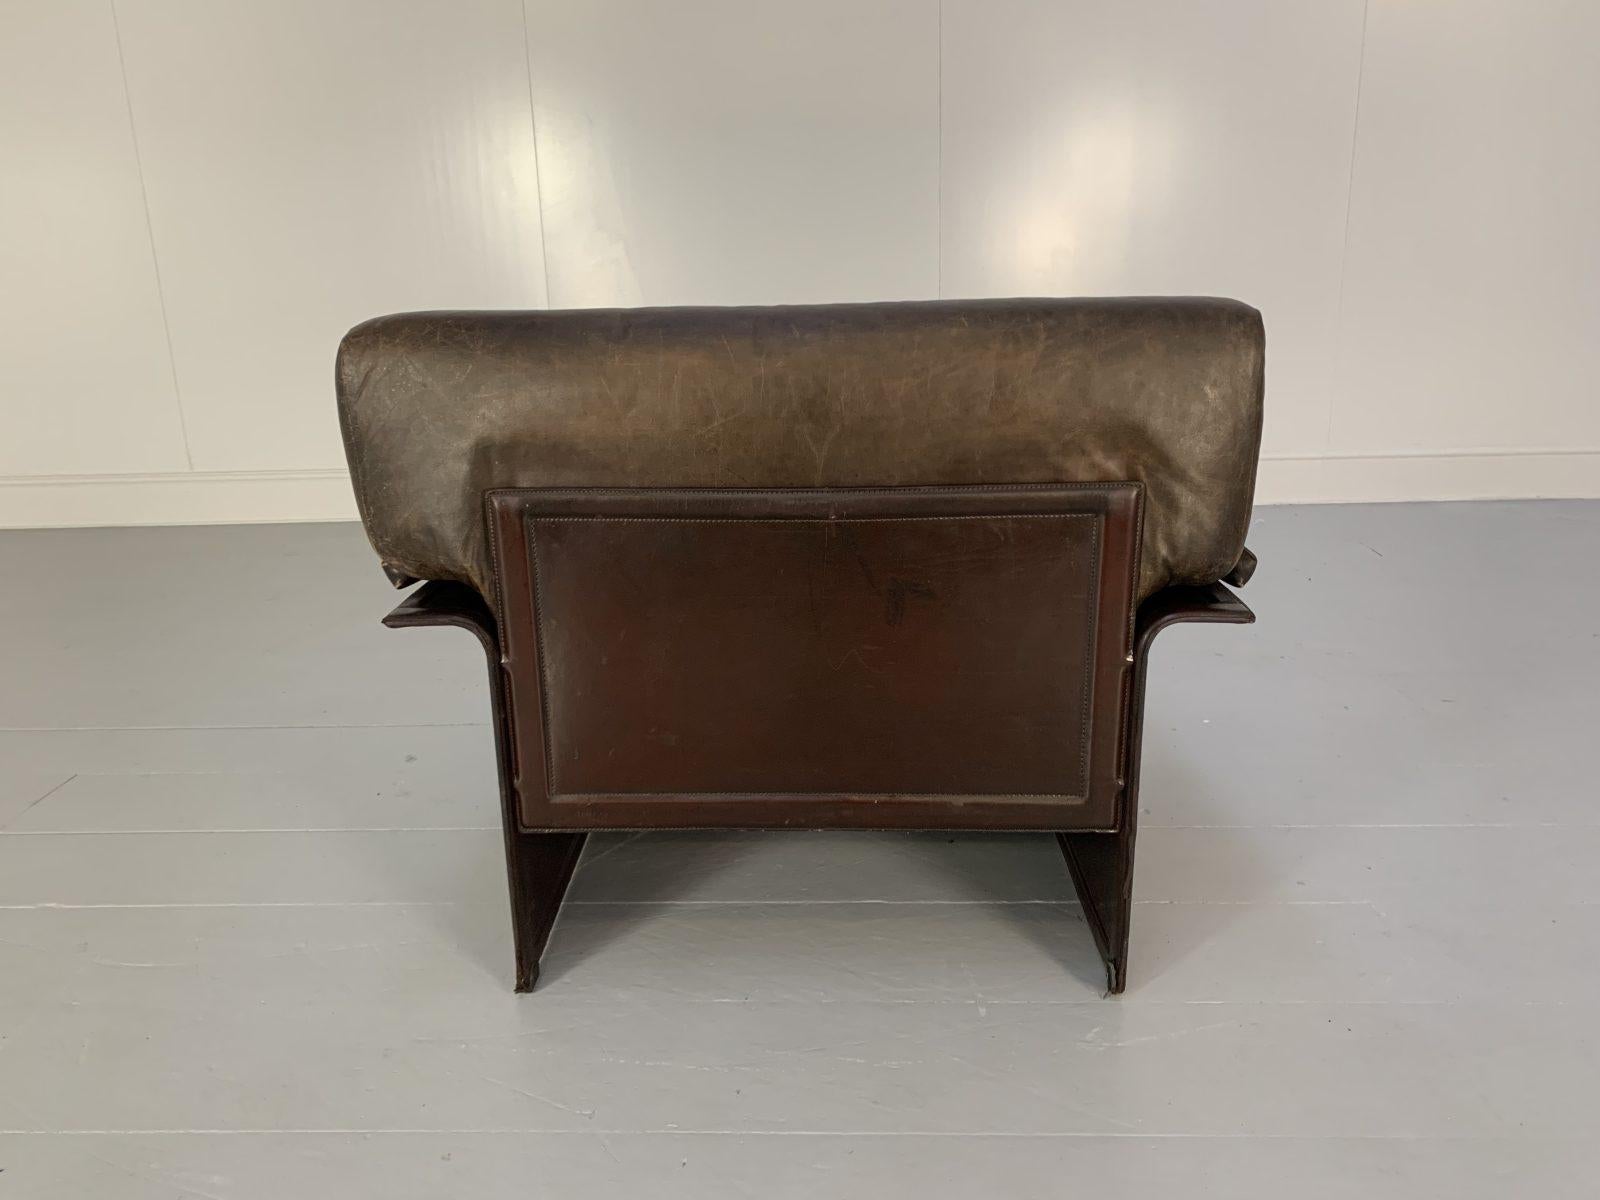 Pair of Matteo Grassi “Tm” Armchairs – in Vintage Brown Leather For Sale 4